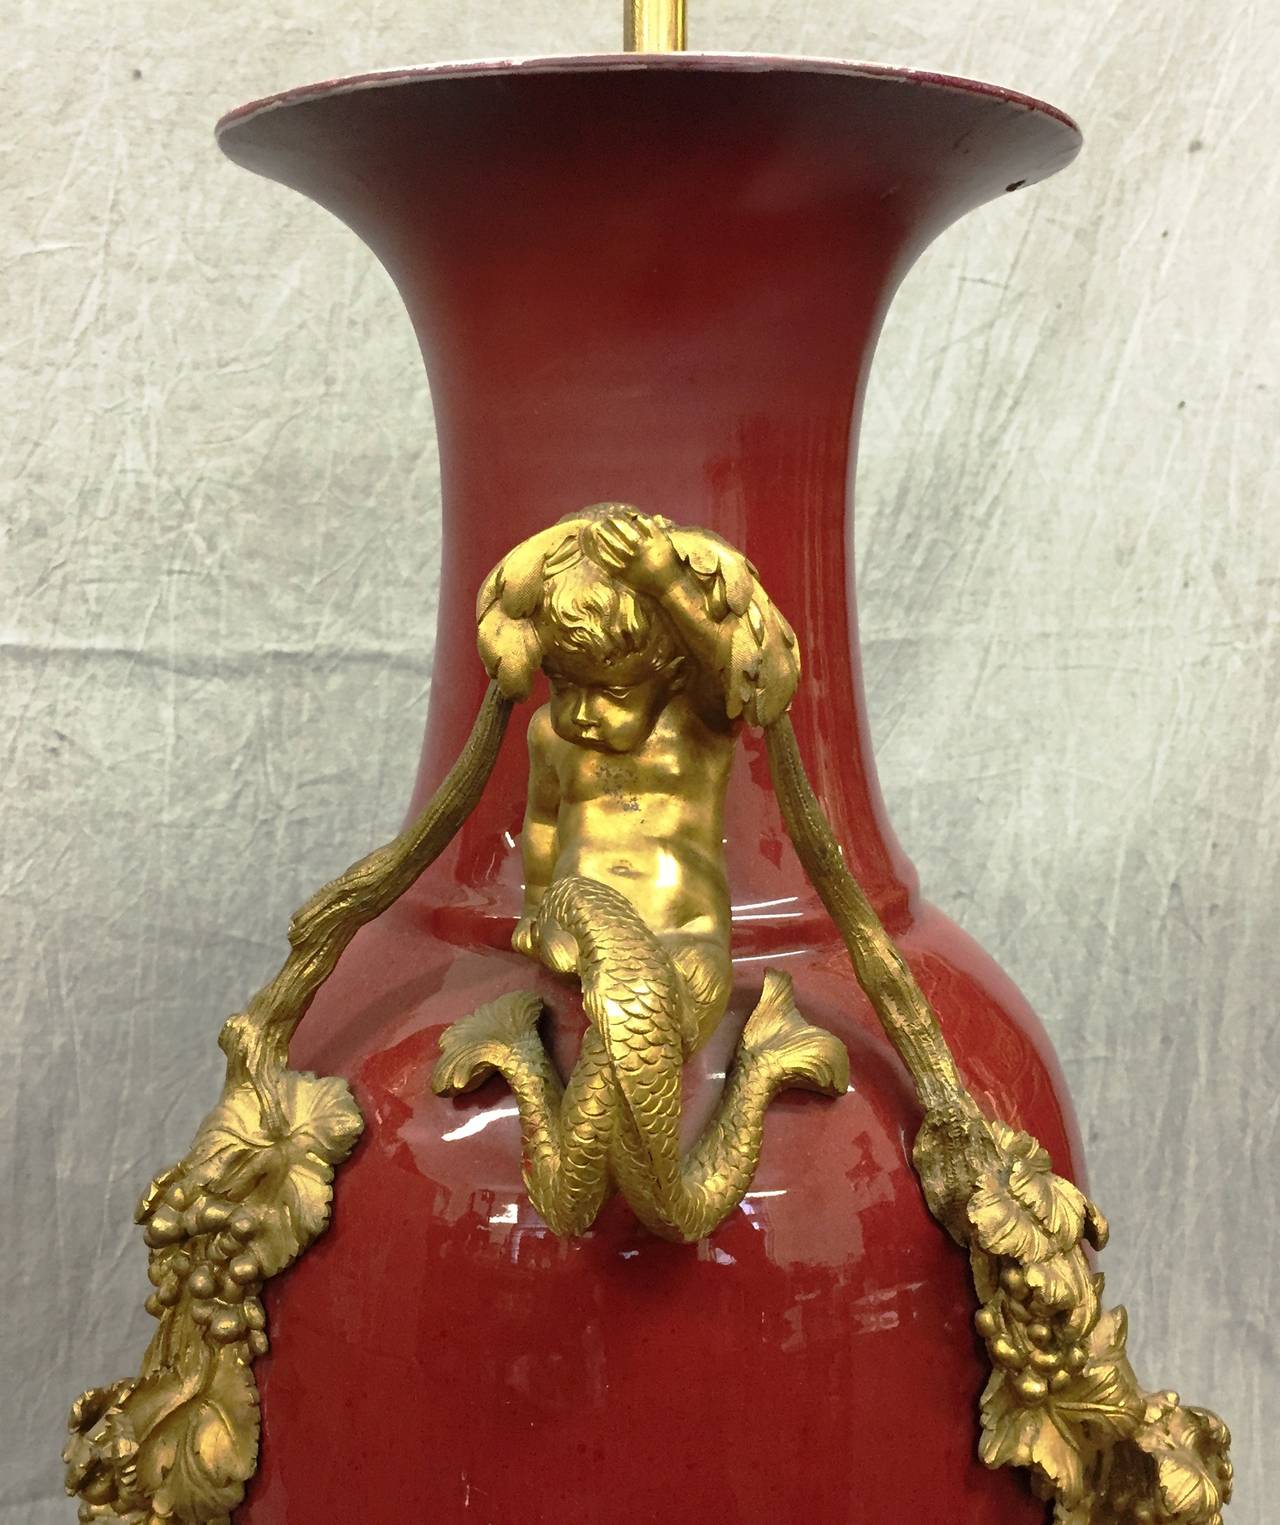 A very impressive Chinese 19th century Sang de Boeuf vase / lamp. Having wonderful French gilded ormolu mounts with C-scroll, grape vine and mermaids decoration.